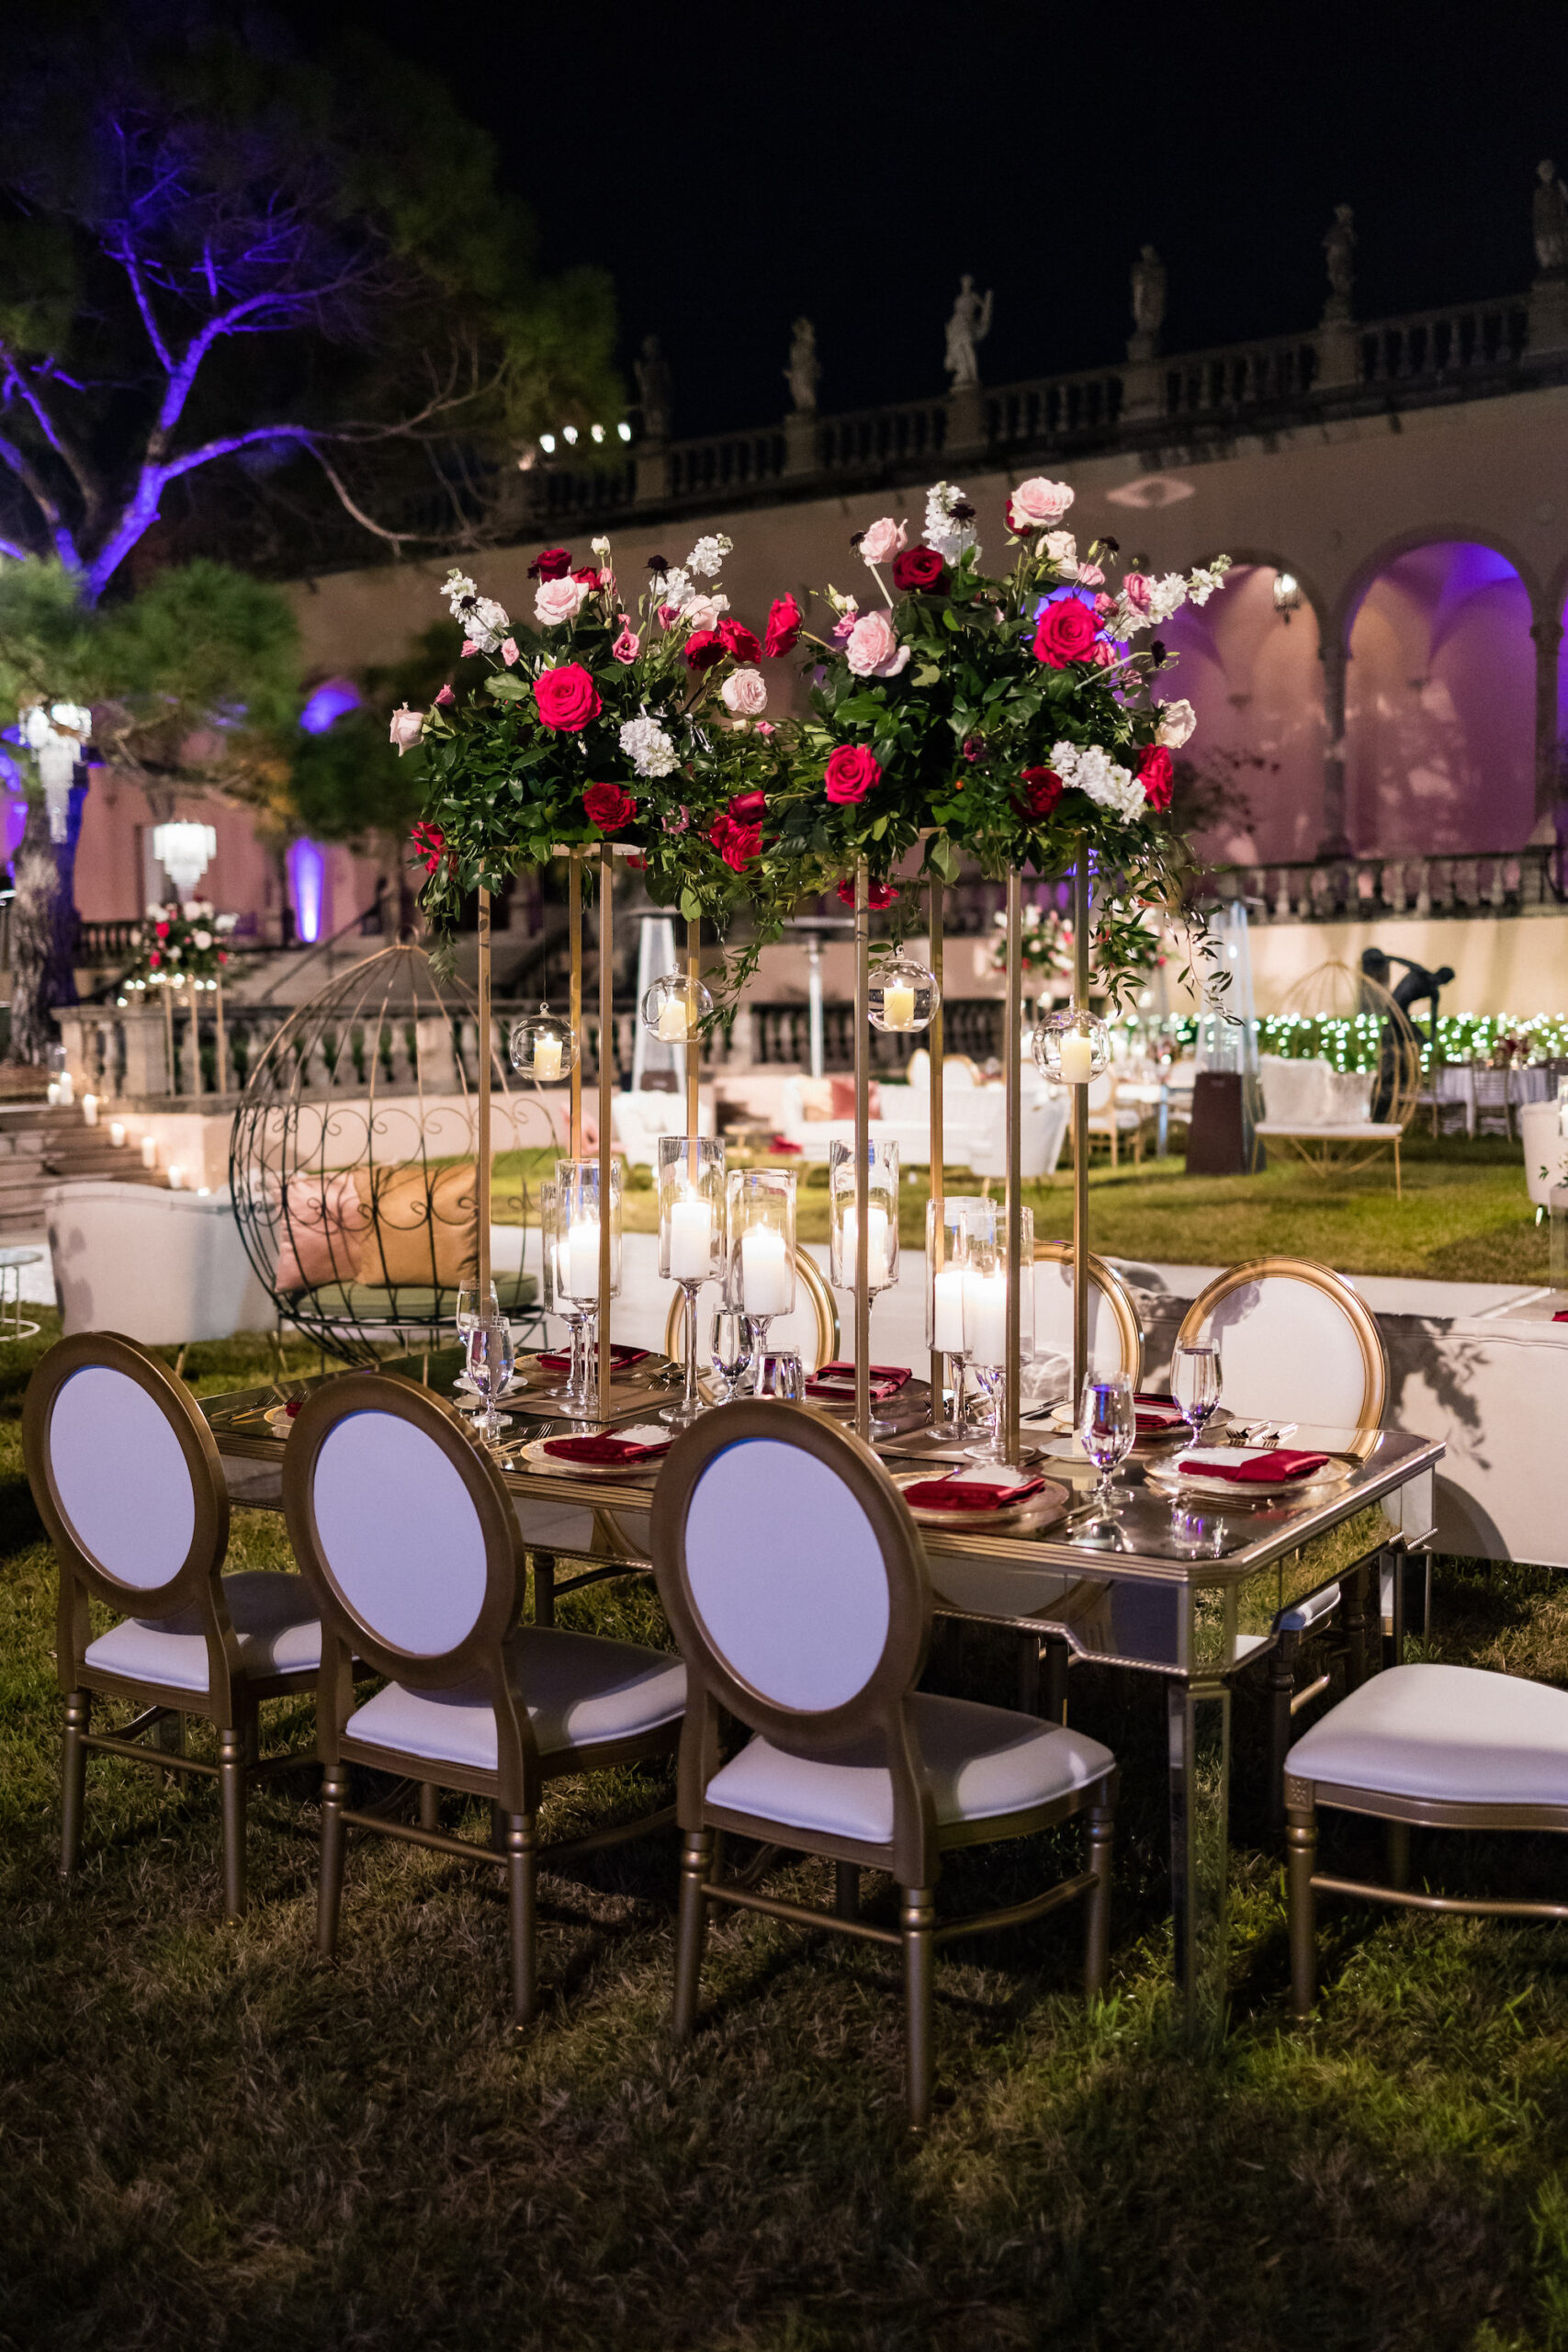 Luxurious Modern Outdoor Evening Courtyard Wedding Reception Inspiration with Tall Centerpiece and White and Gold Charis | Sarasota Wedding Venue The Ringling Museum | Florist FH Events